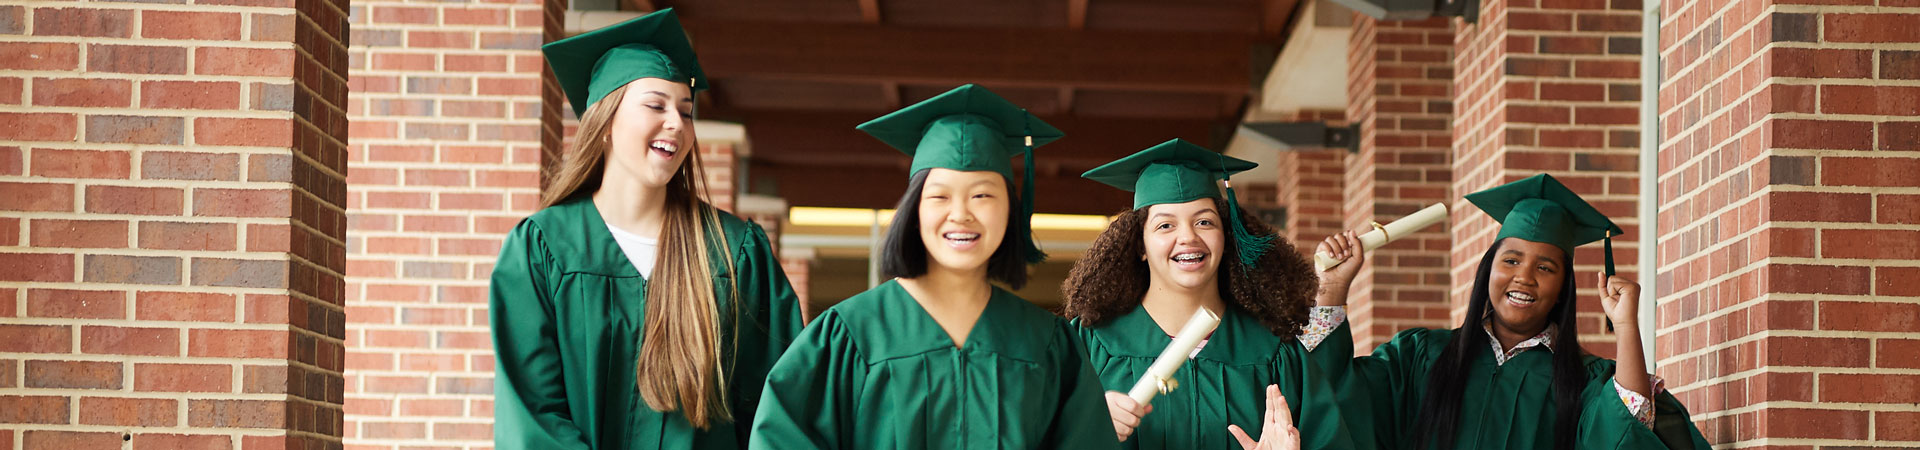  A group of Girl Scouts dressed in green graduation caps and gowns walk down a brick corridor with diplomas in their hands. 